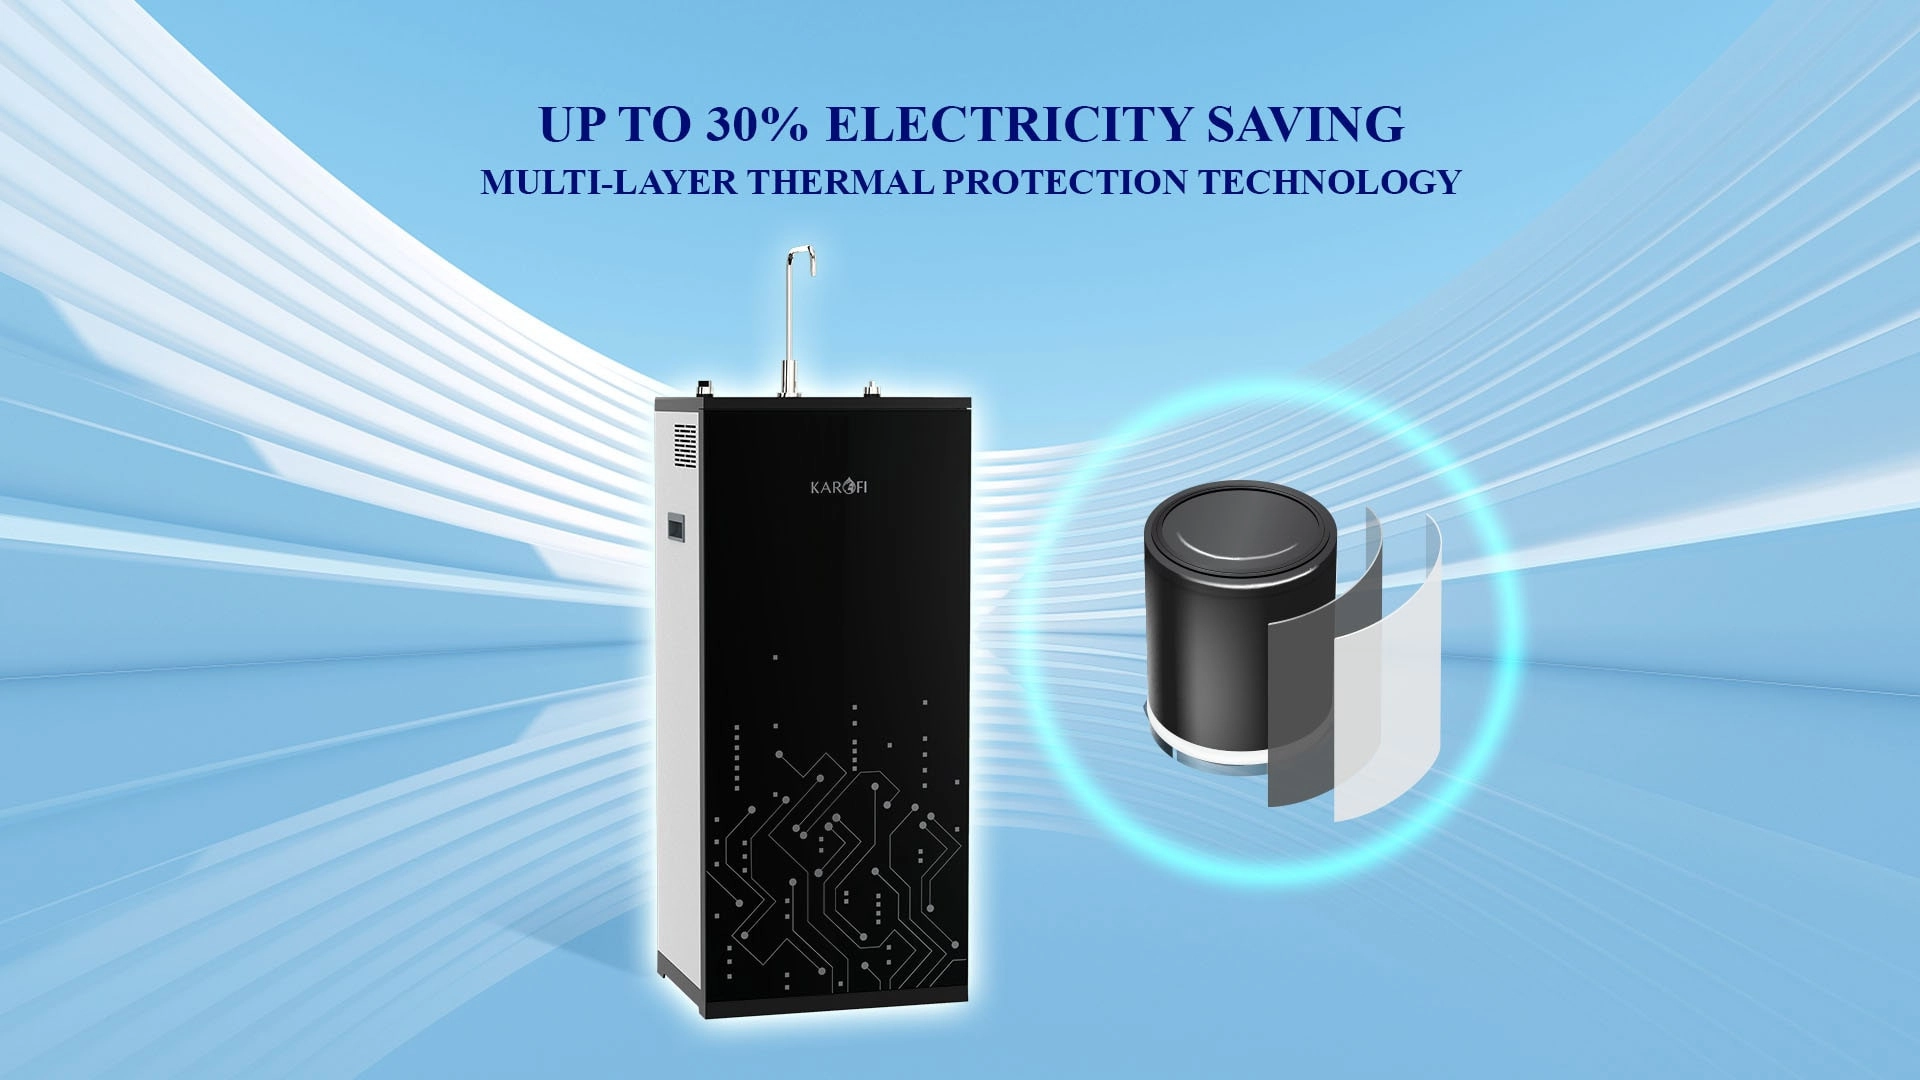 Up to 30% electricity saving